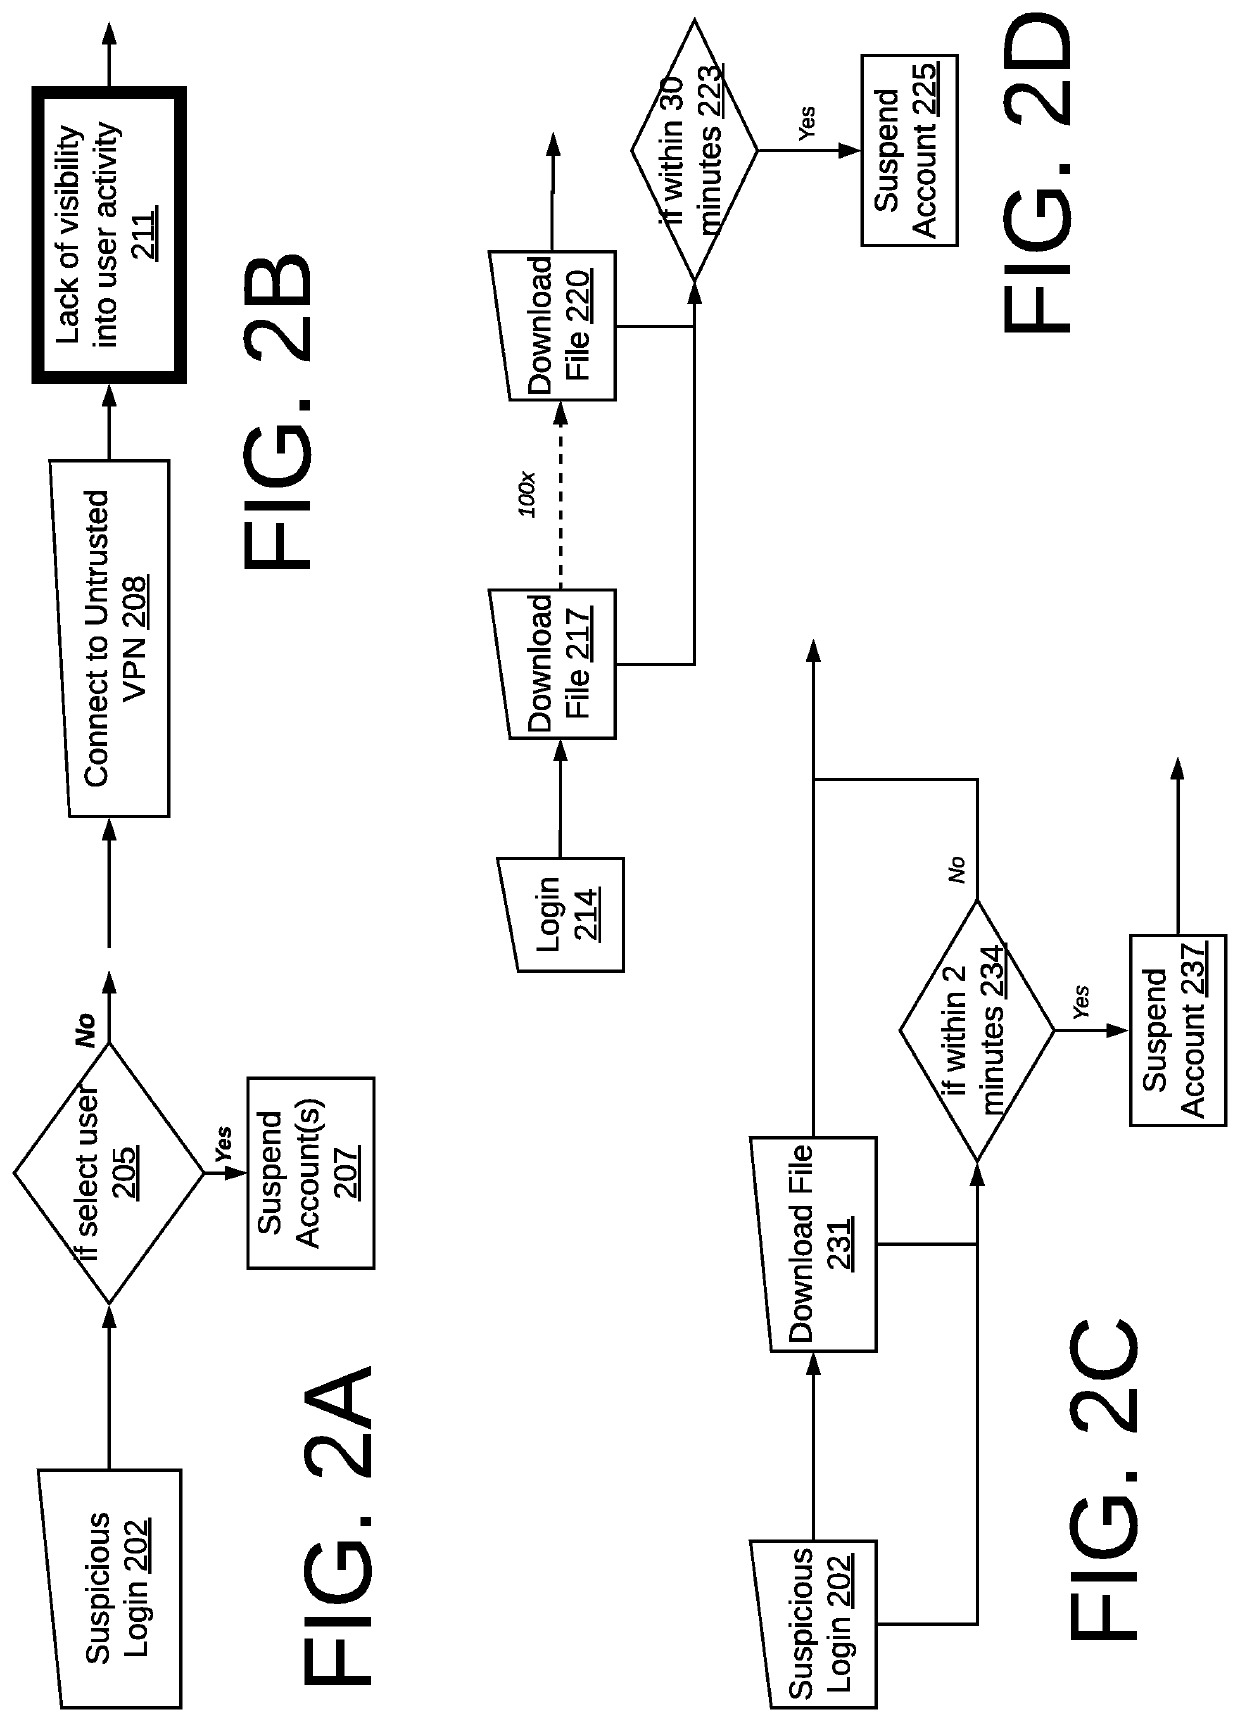 Methods and systems to manage data objects in a cloud computing environment